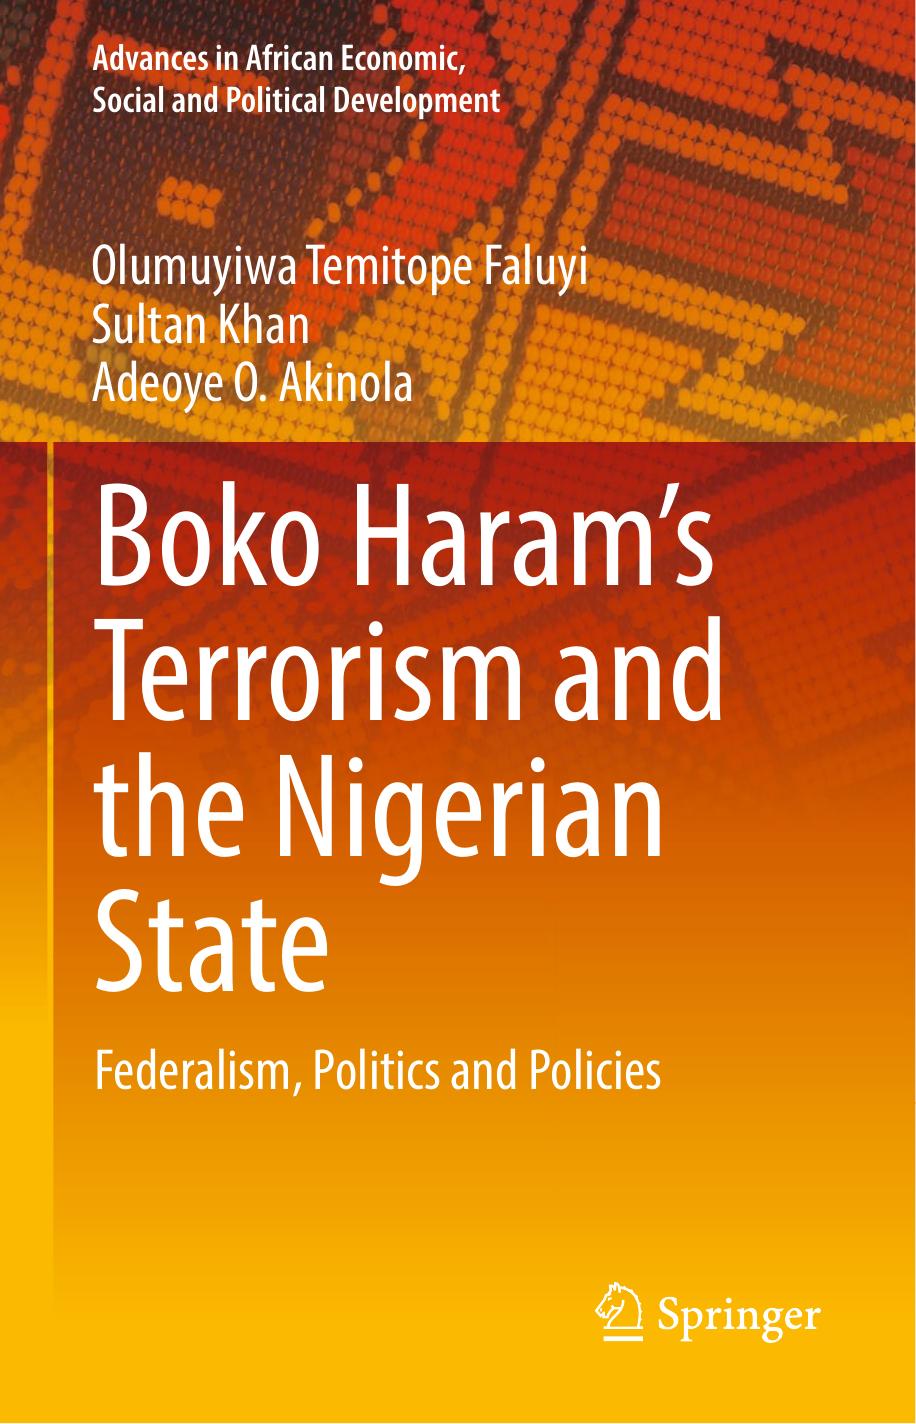 Boko Haram’s Terrorism and the Nigerian State Federalism, Politics and Policies 2019